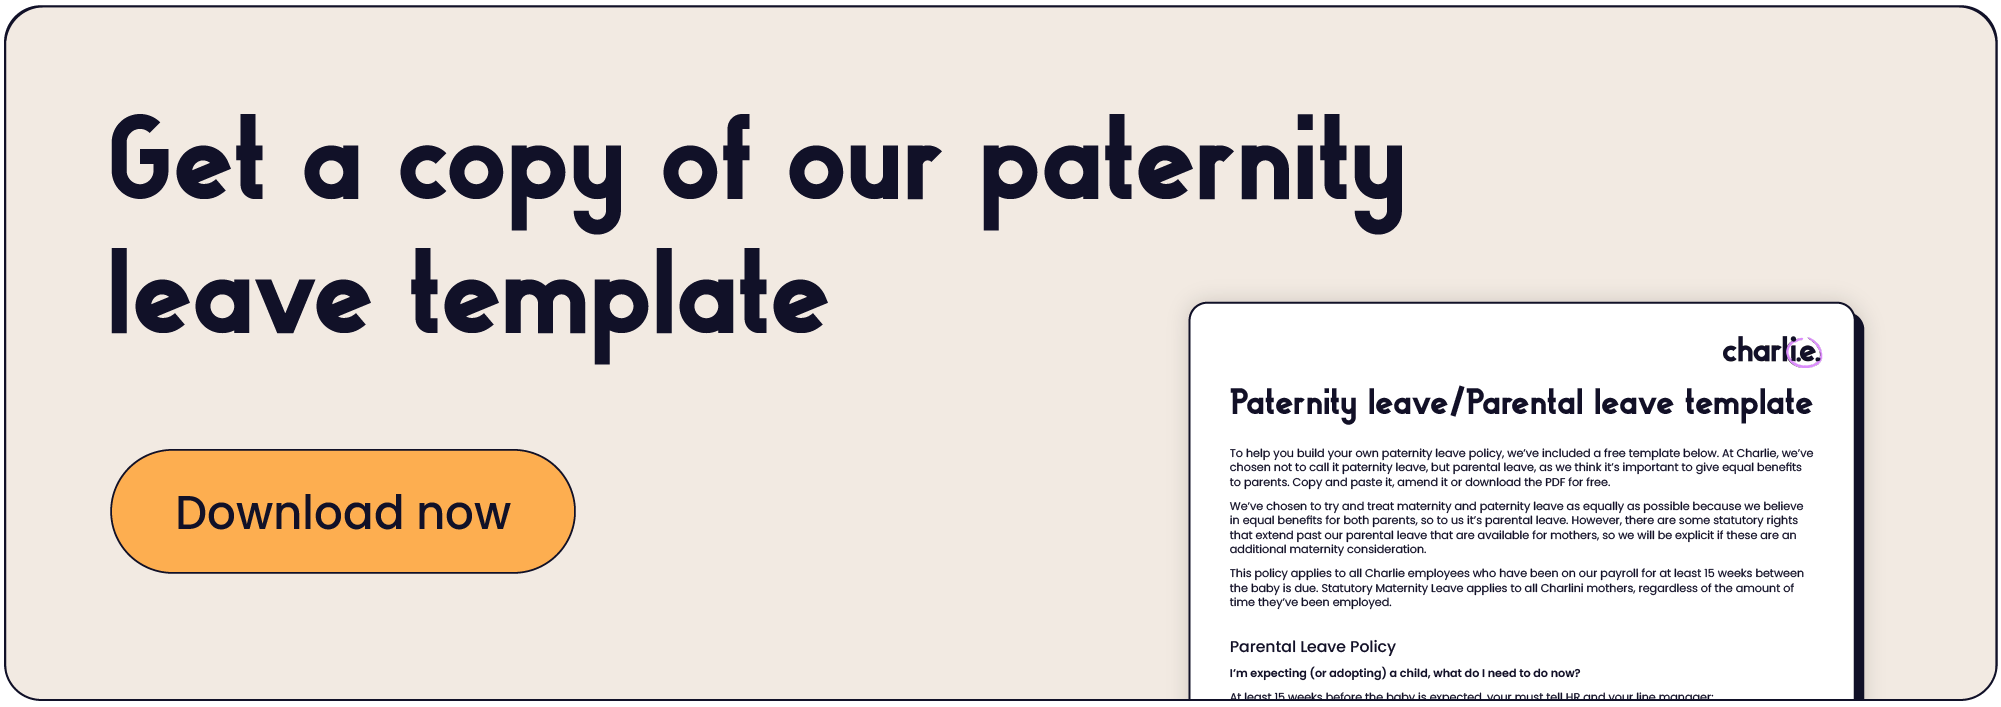 Download our paternity leave template.webp